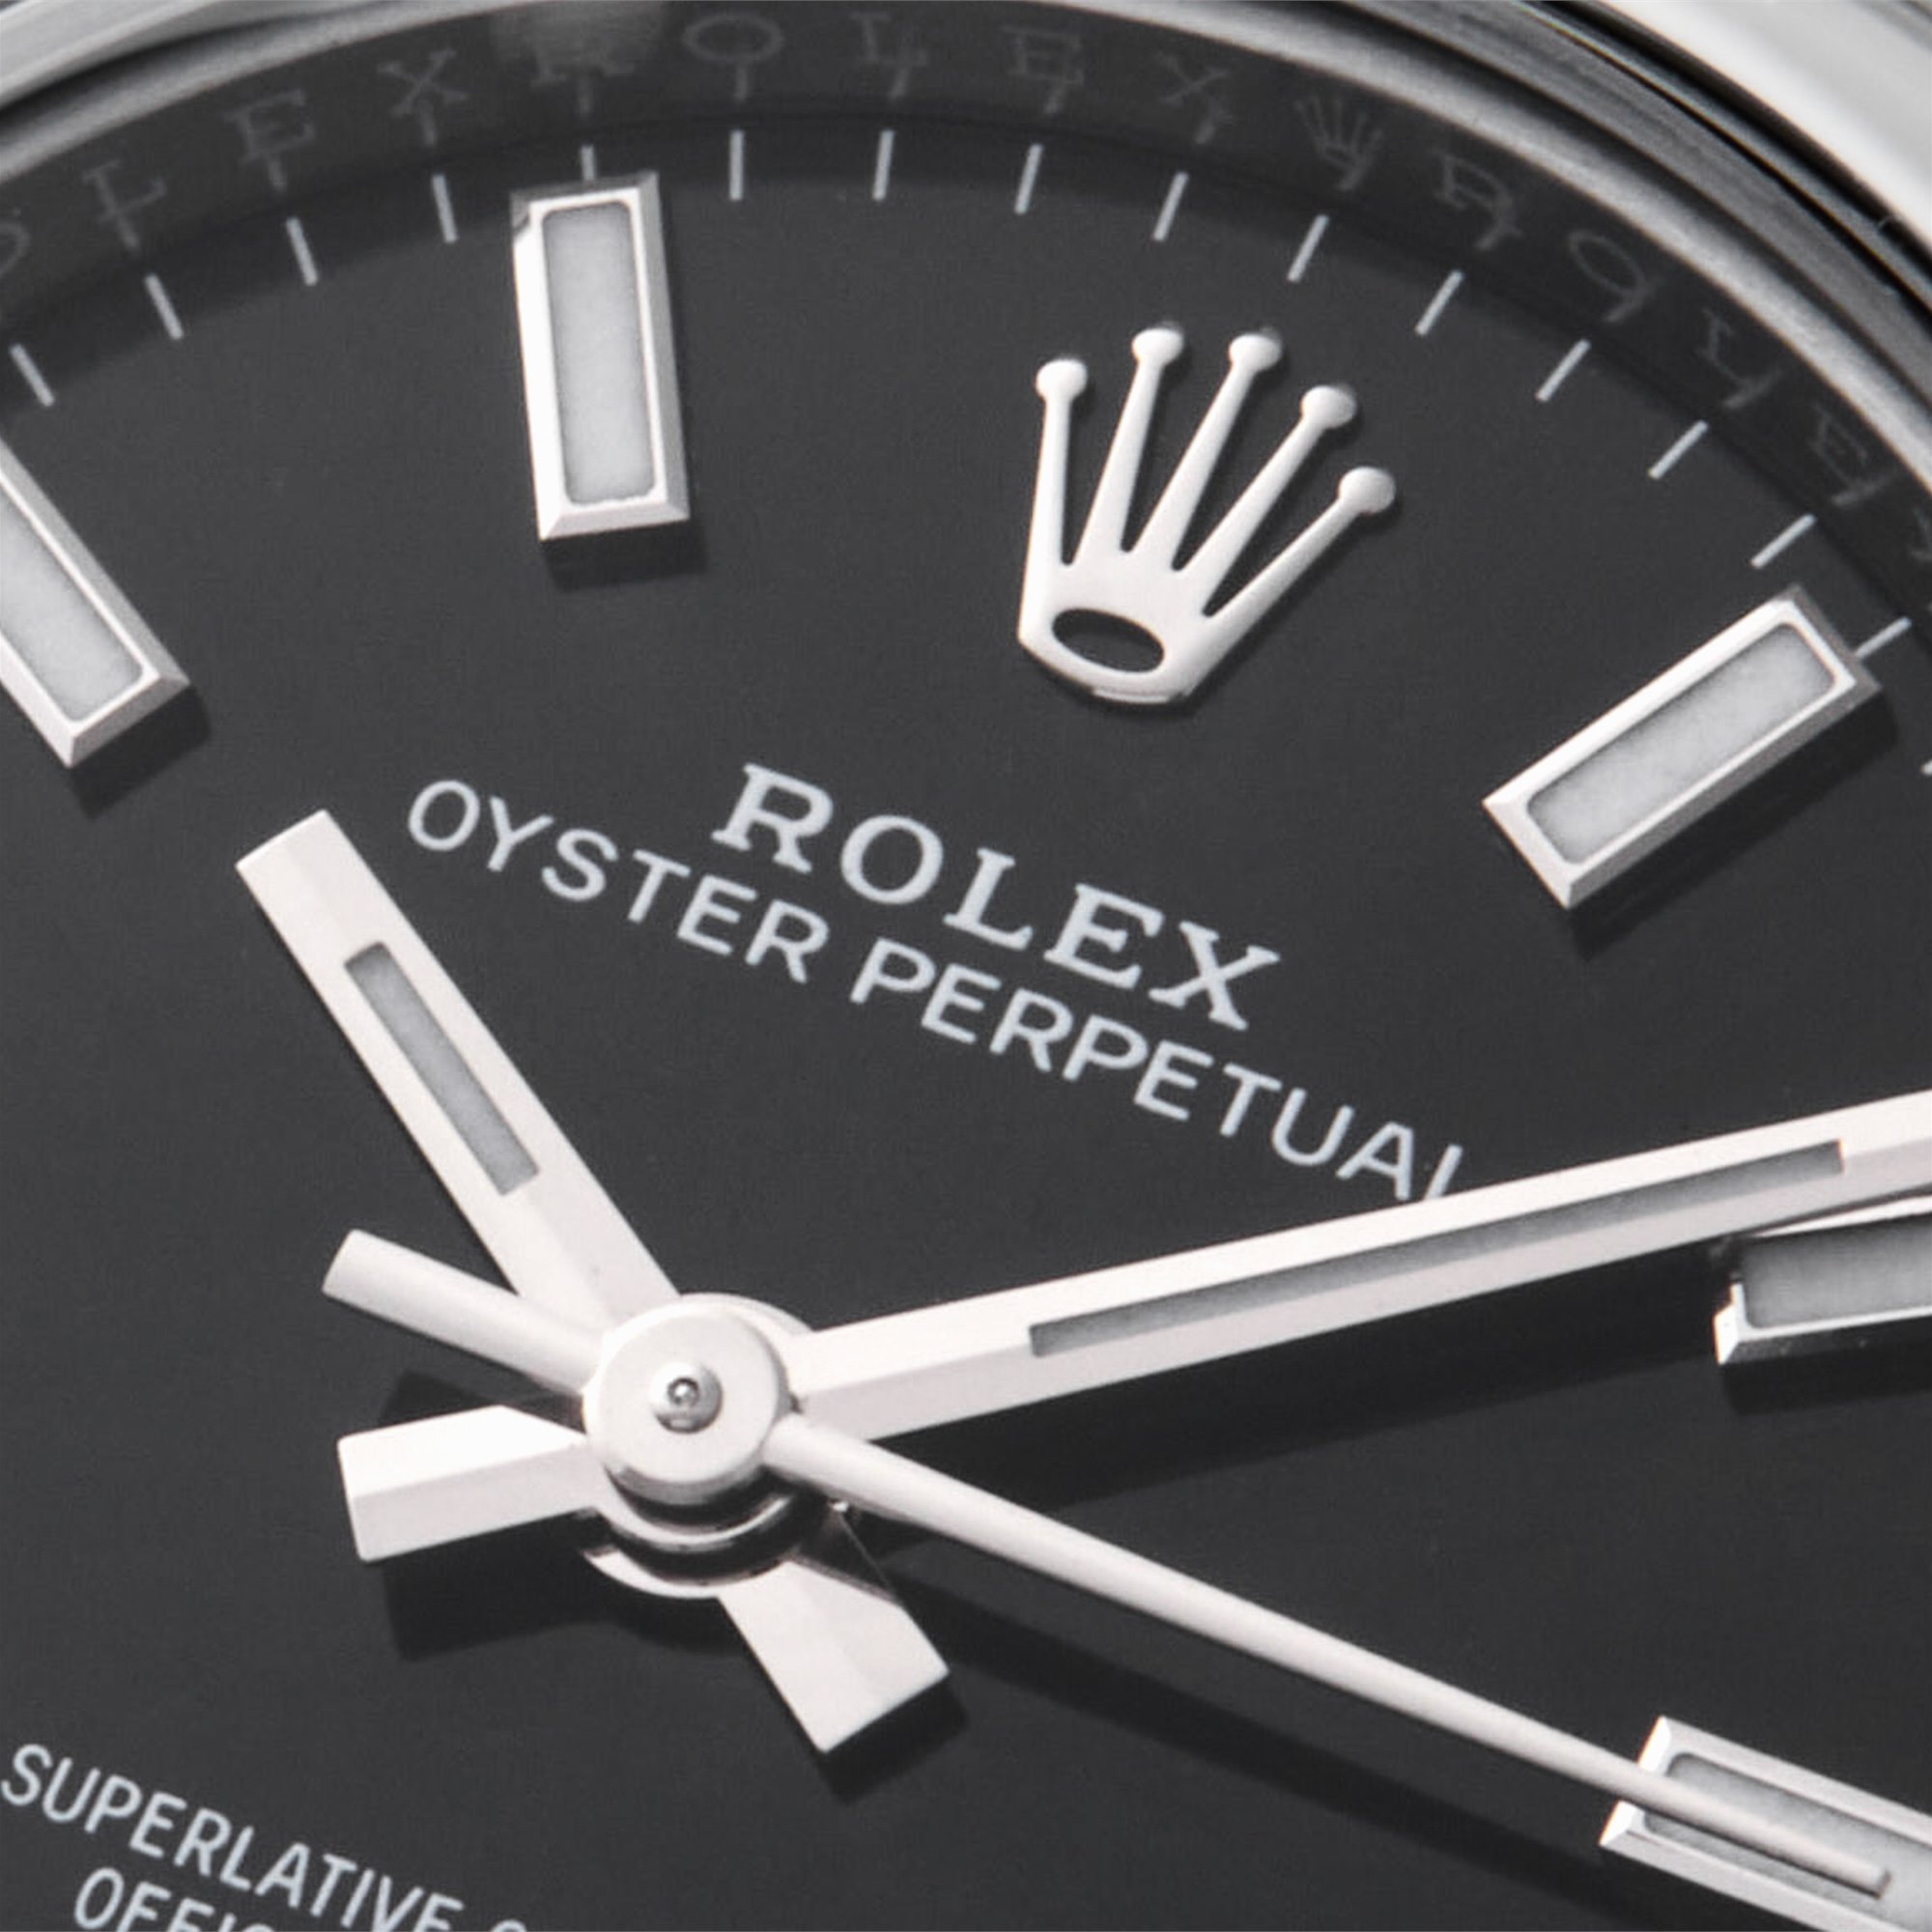 Rolex Oyster Perpetual 26 Stainless Steel 176200